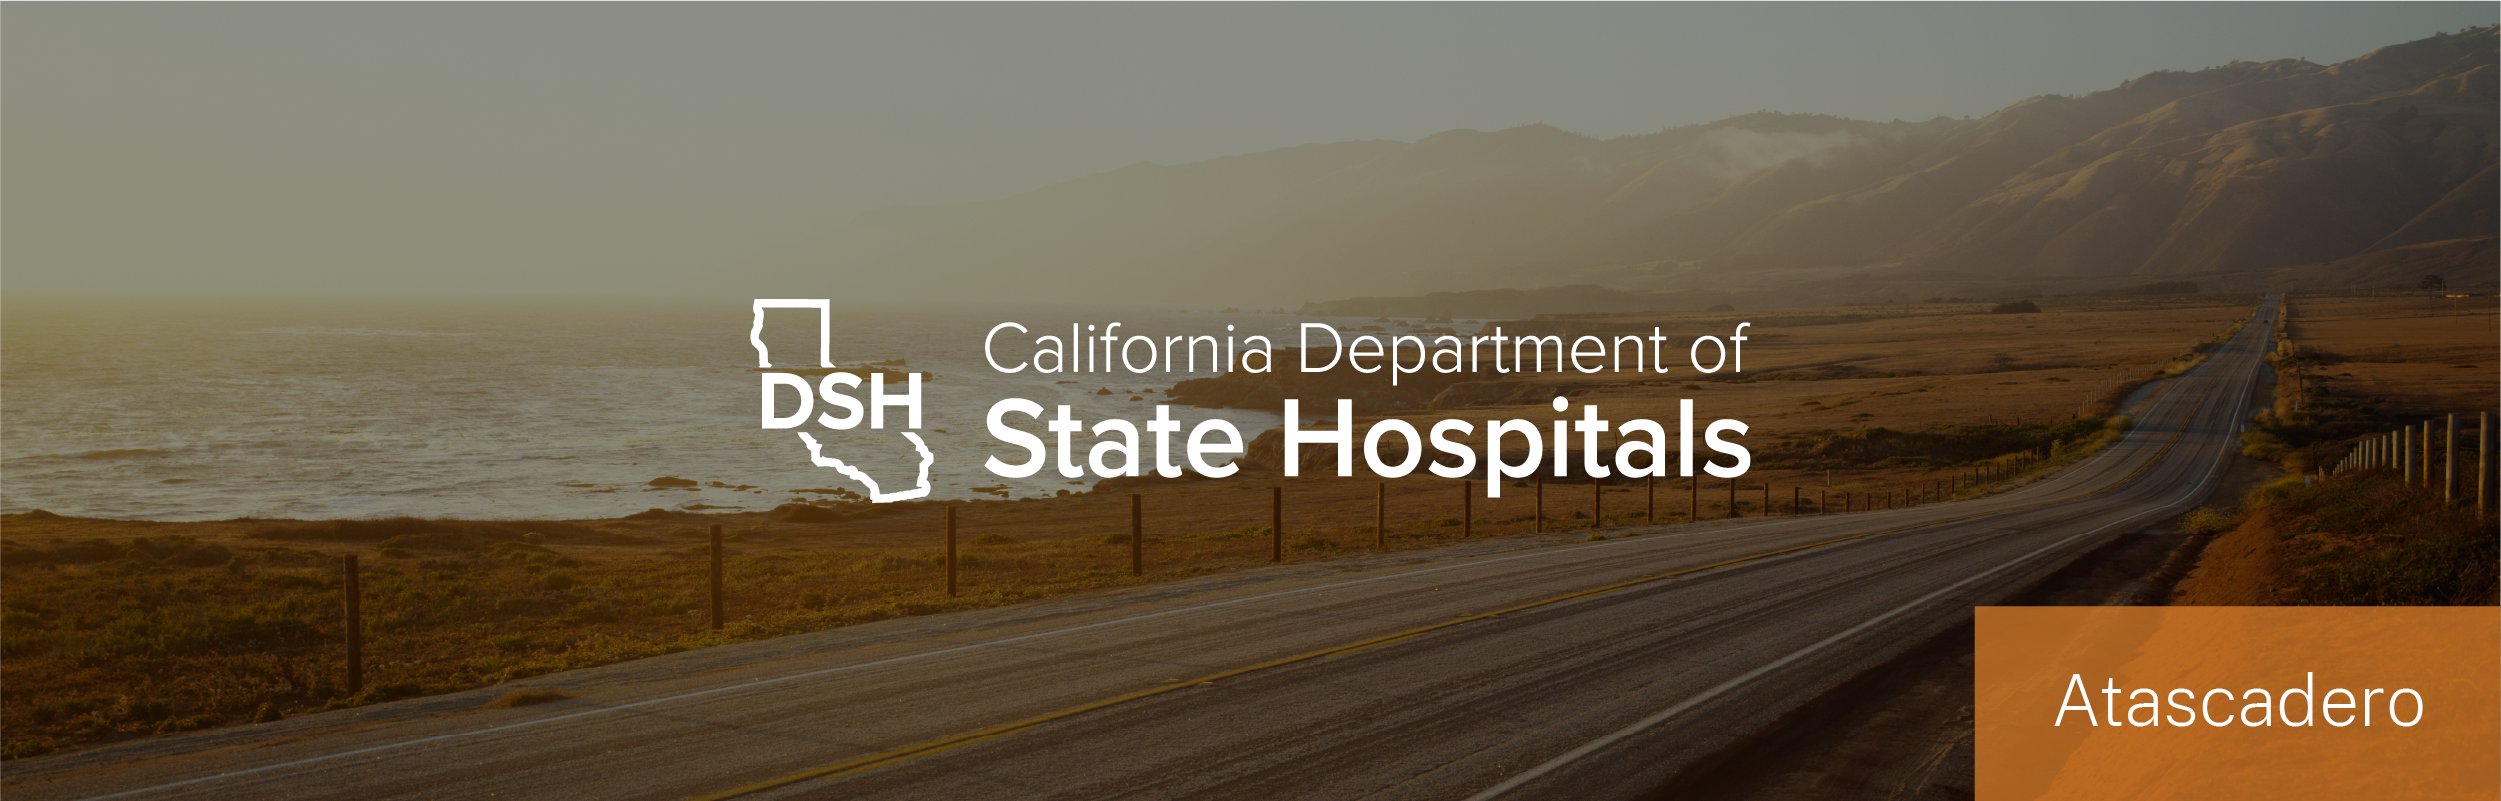 San Luis Obispo beach and country road scenery and header for Department of State Hospitals Atascadero